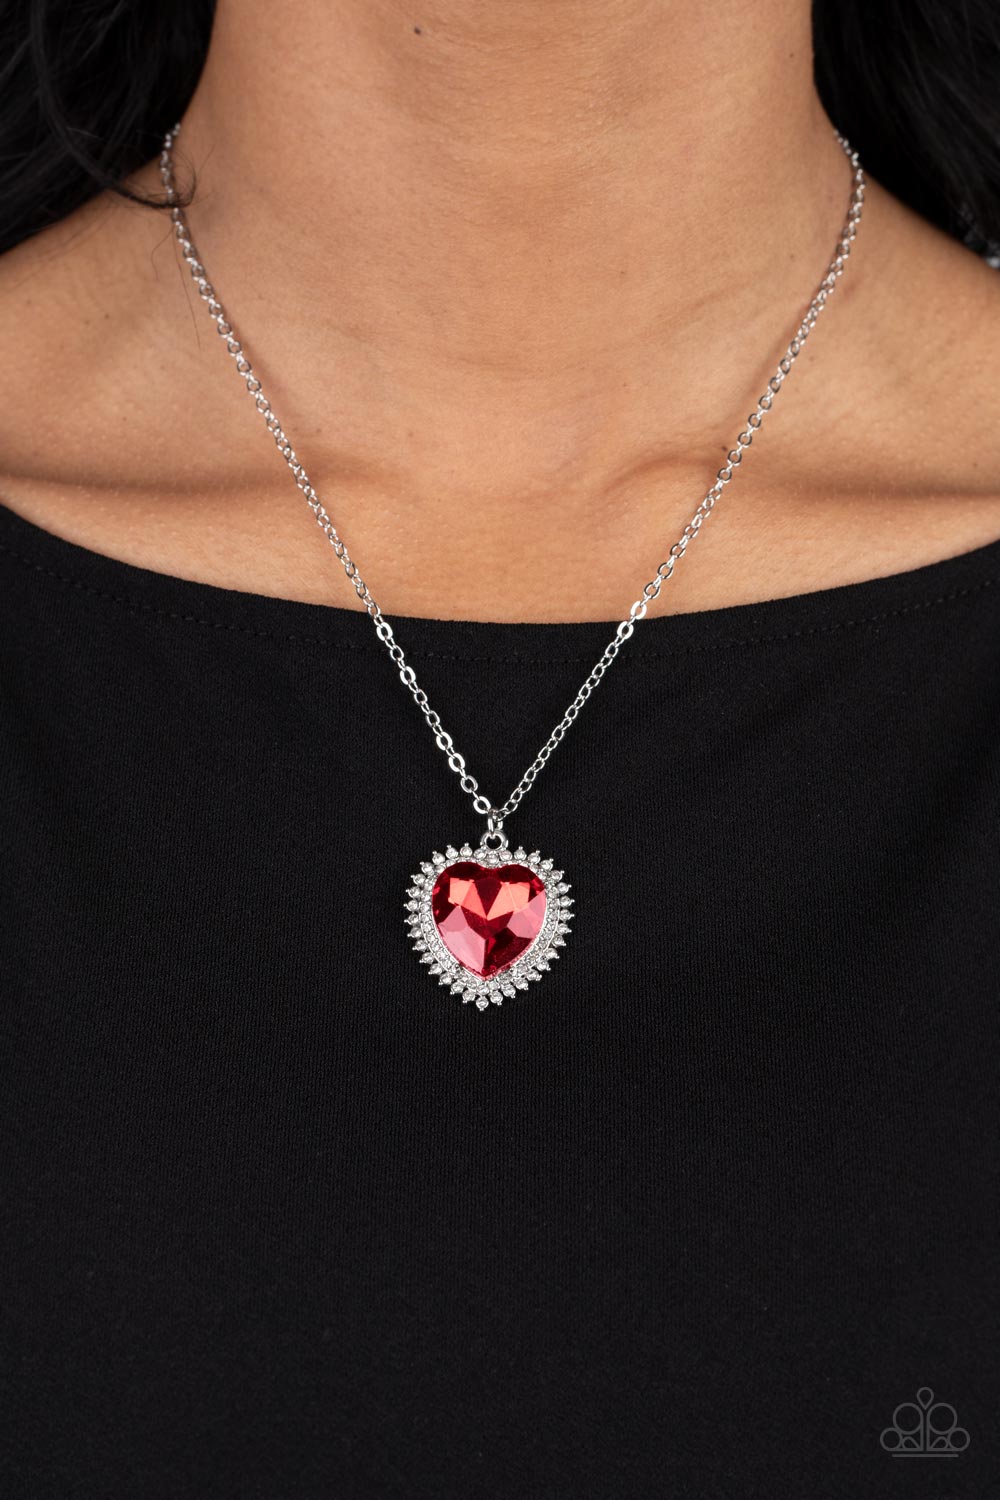 Sweethearts Stroll - Red Heart Gem White Rhinestones Silver Short Necklace